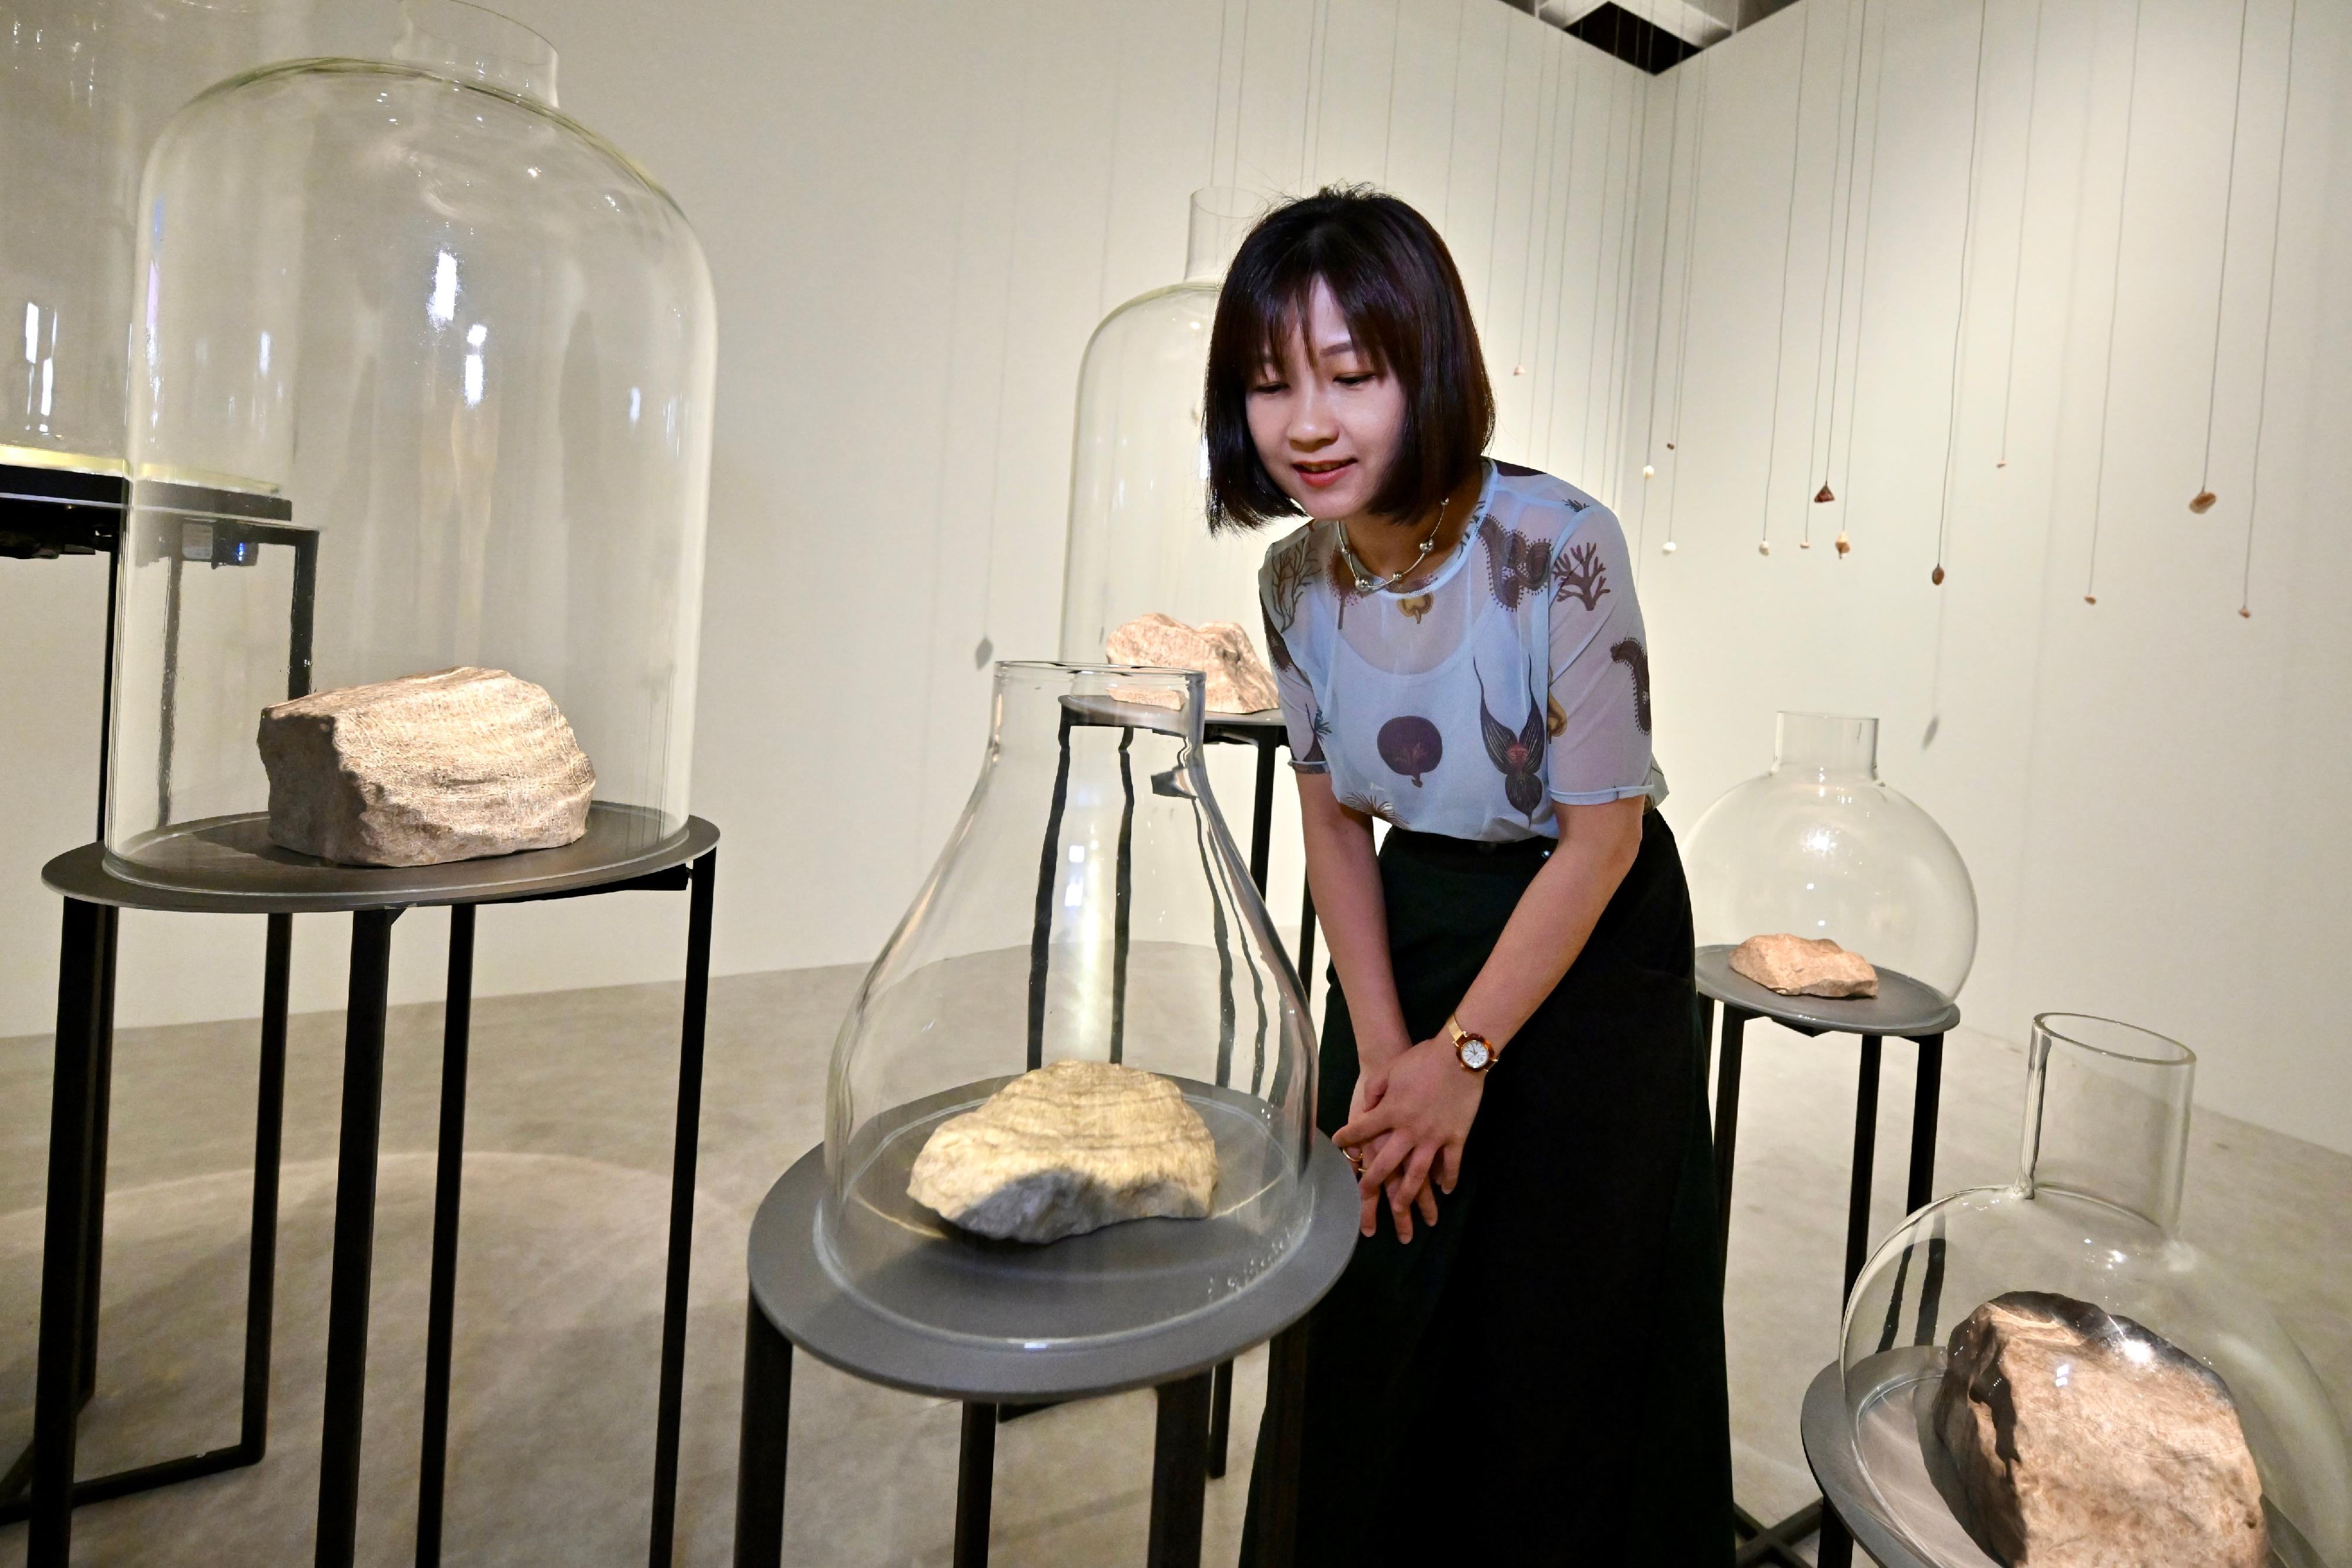 The opening ceremony of the "The Hong Kong Jockey Club Series: Fragrance of Time - In Search of Chinese Art of Scent" exhibition was held today (June 27) at the Hong Kong Museum of Art. Photo shows Hong Kong artist So Wing-po and her artwork "Scent of Raindrop".